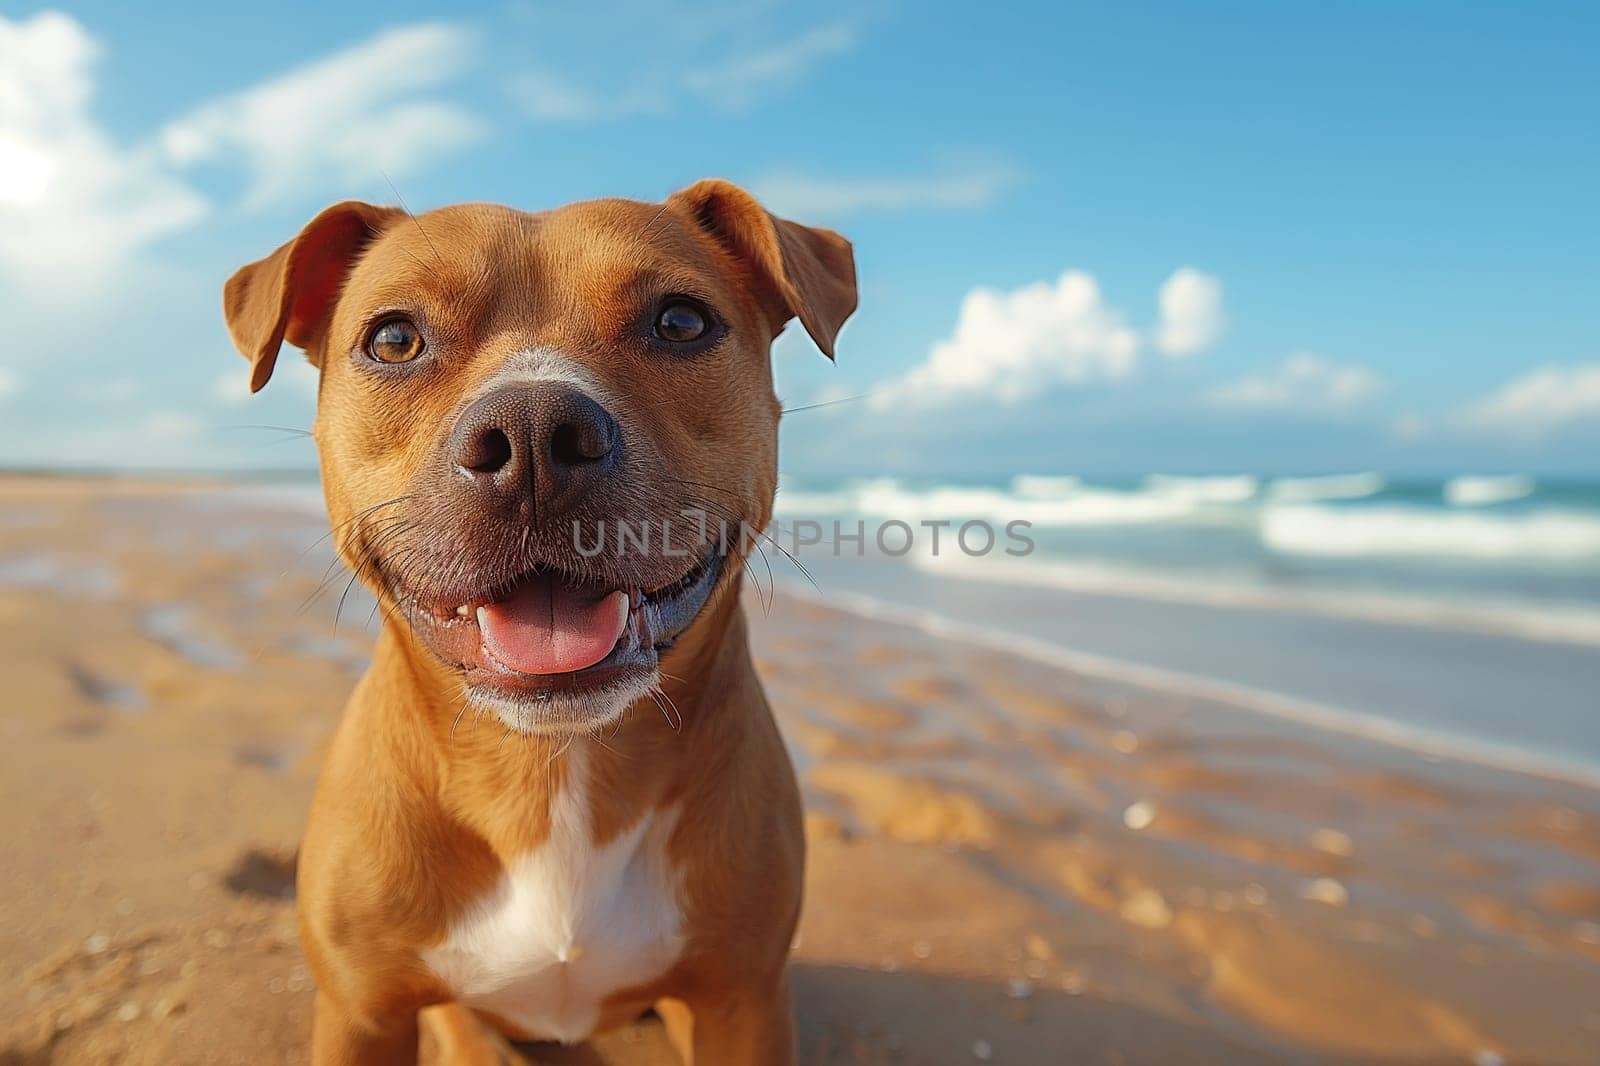 A pitbull relaxing on the beach during sunset by Hype2art